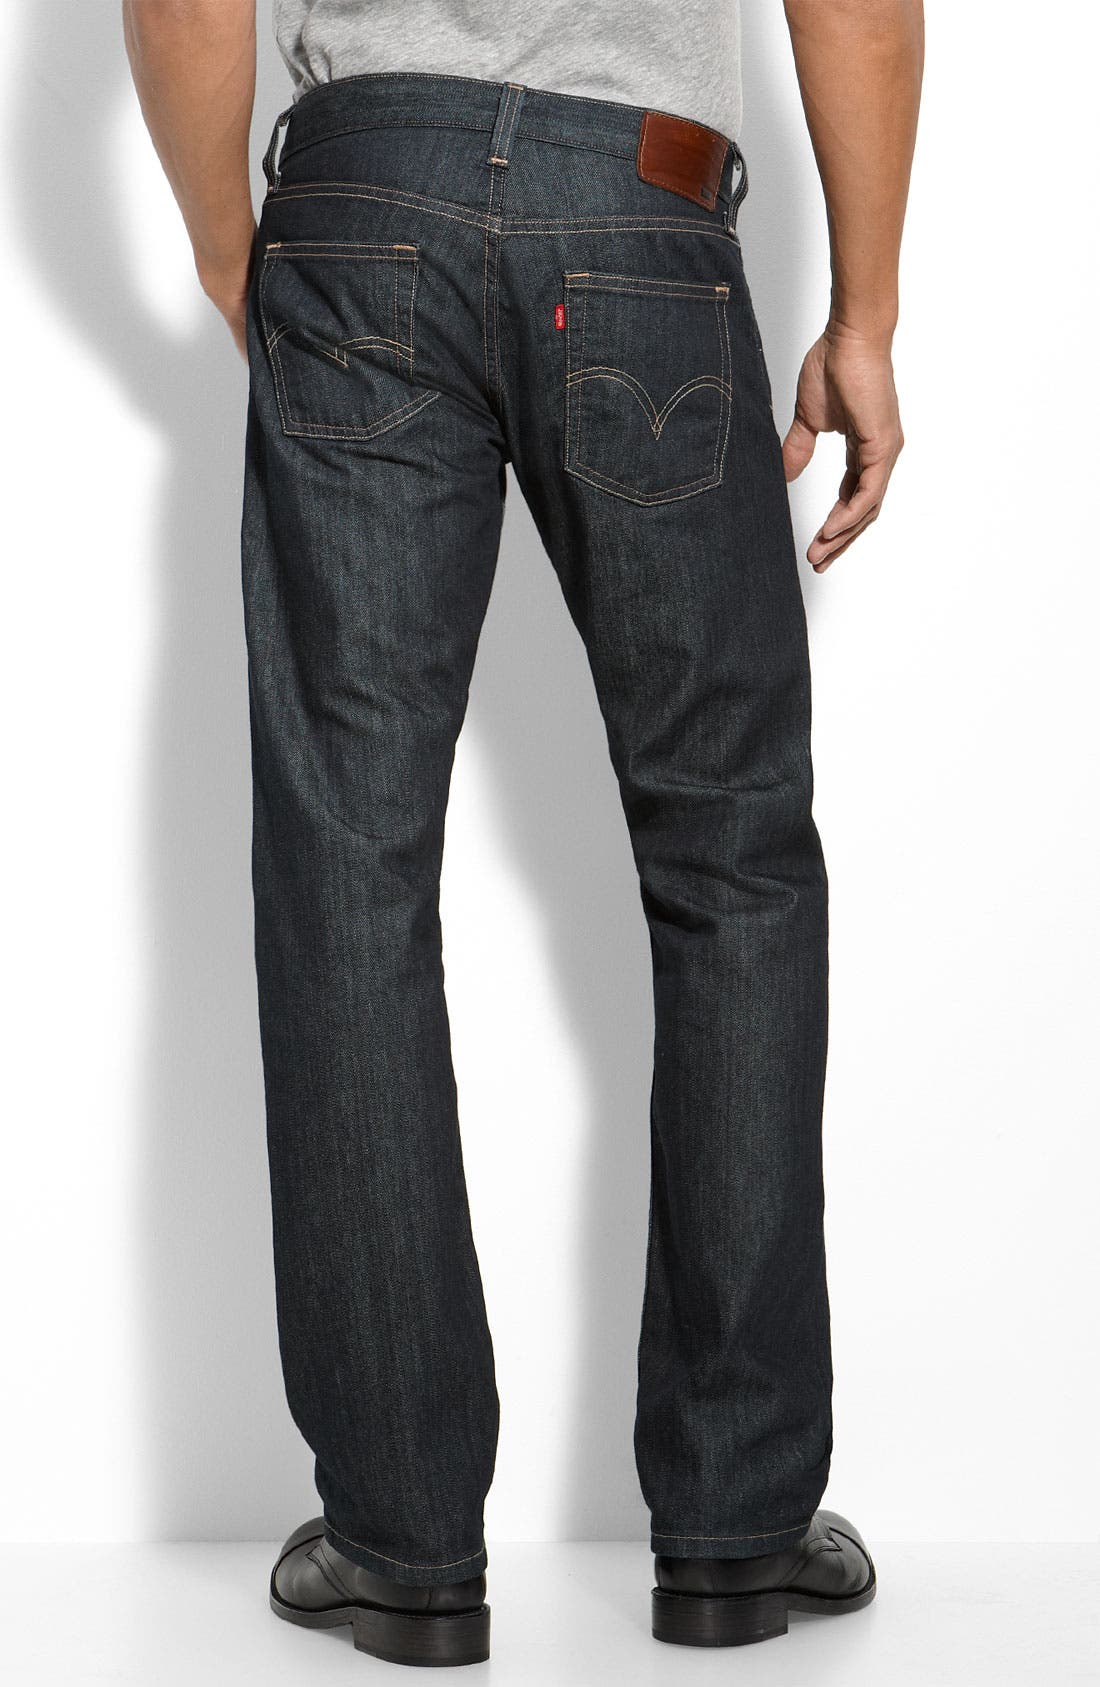 levis 514 red